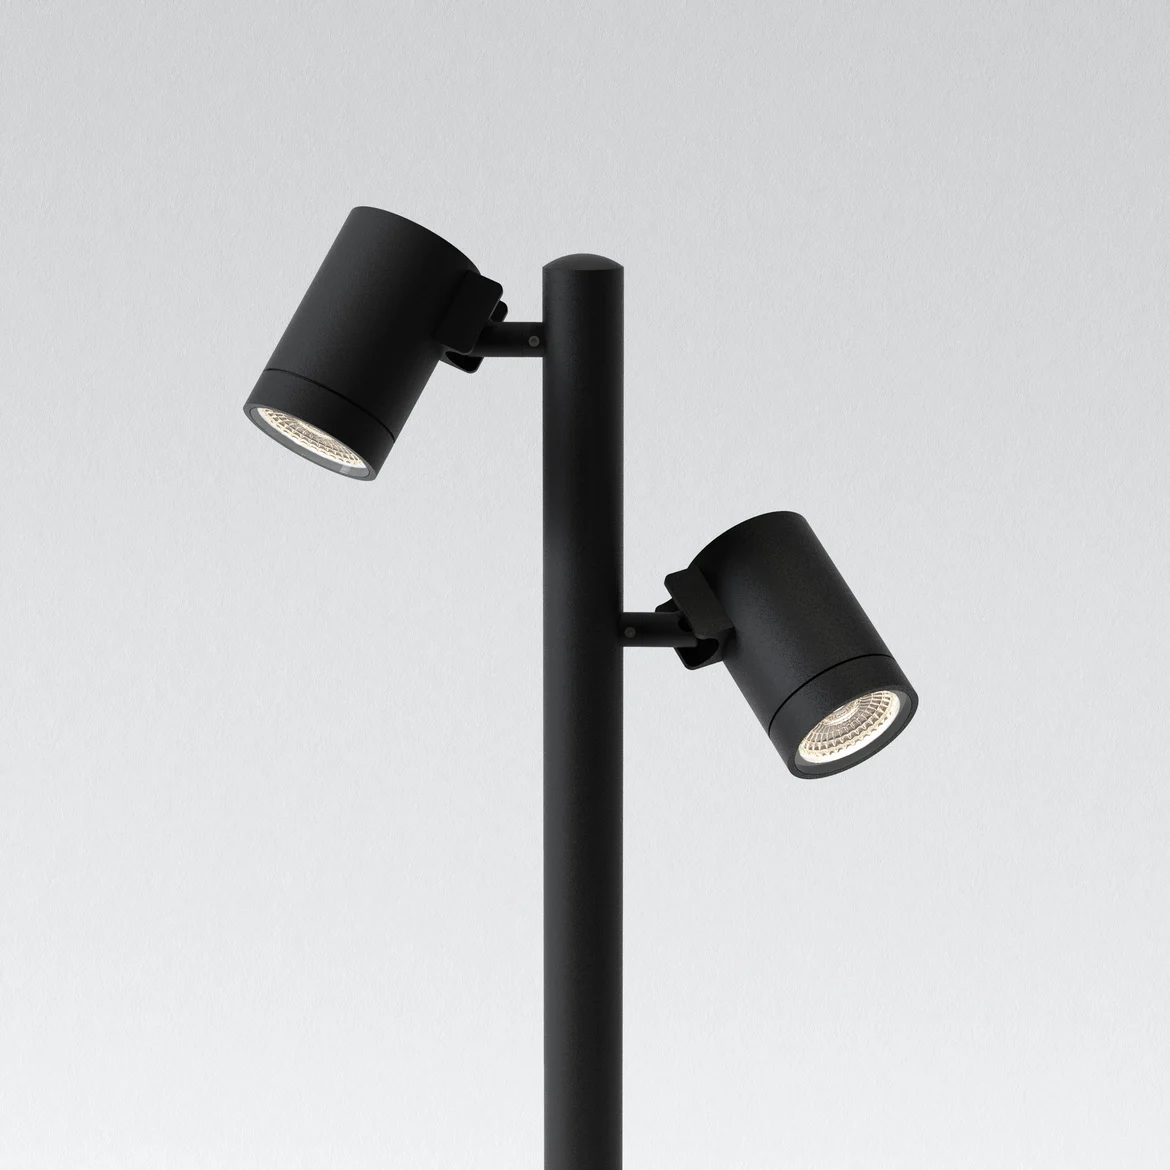 The Bayville Spike 900 spot light features a sleek, modern design with cylindrical body ending in a spike for outdoor in-ground installation with two mounted spotlights. Made from steel and available in a textured black finish. IP66 rated and suitable for outdoor use. Comes complete with an integrated 15.7W LED in 3000K.